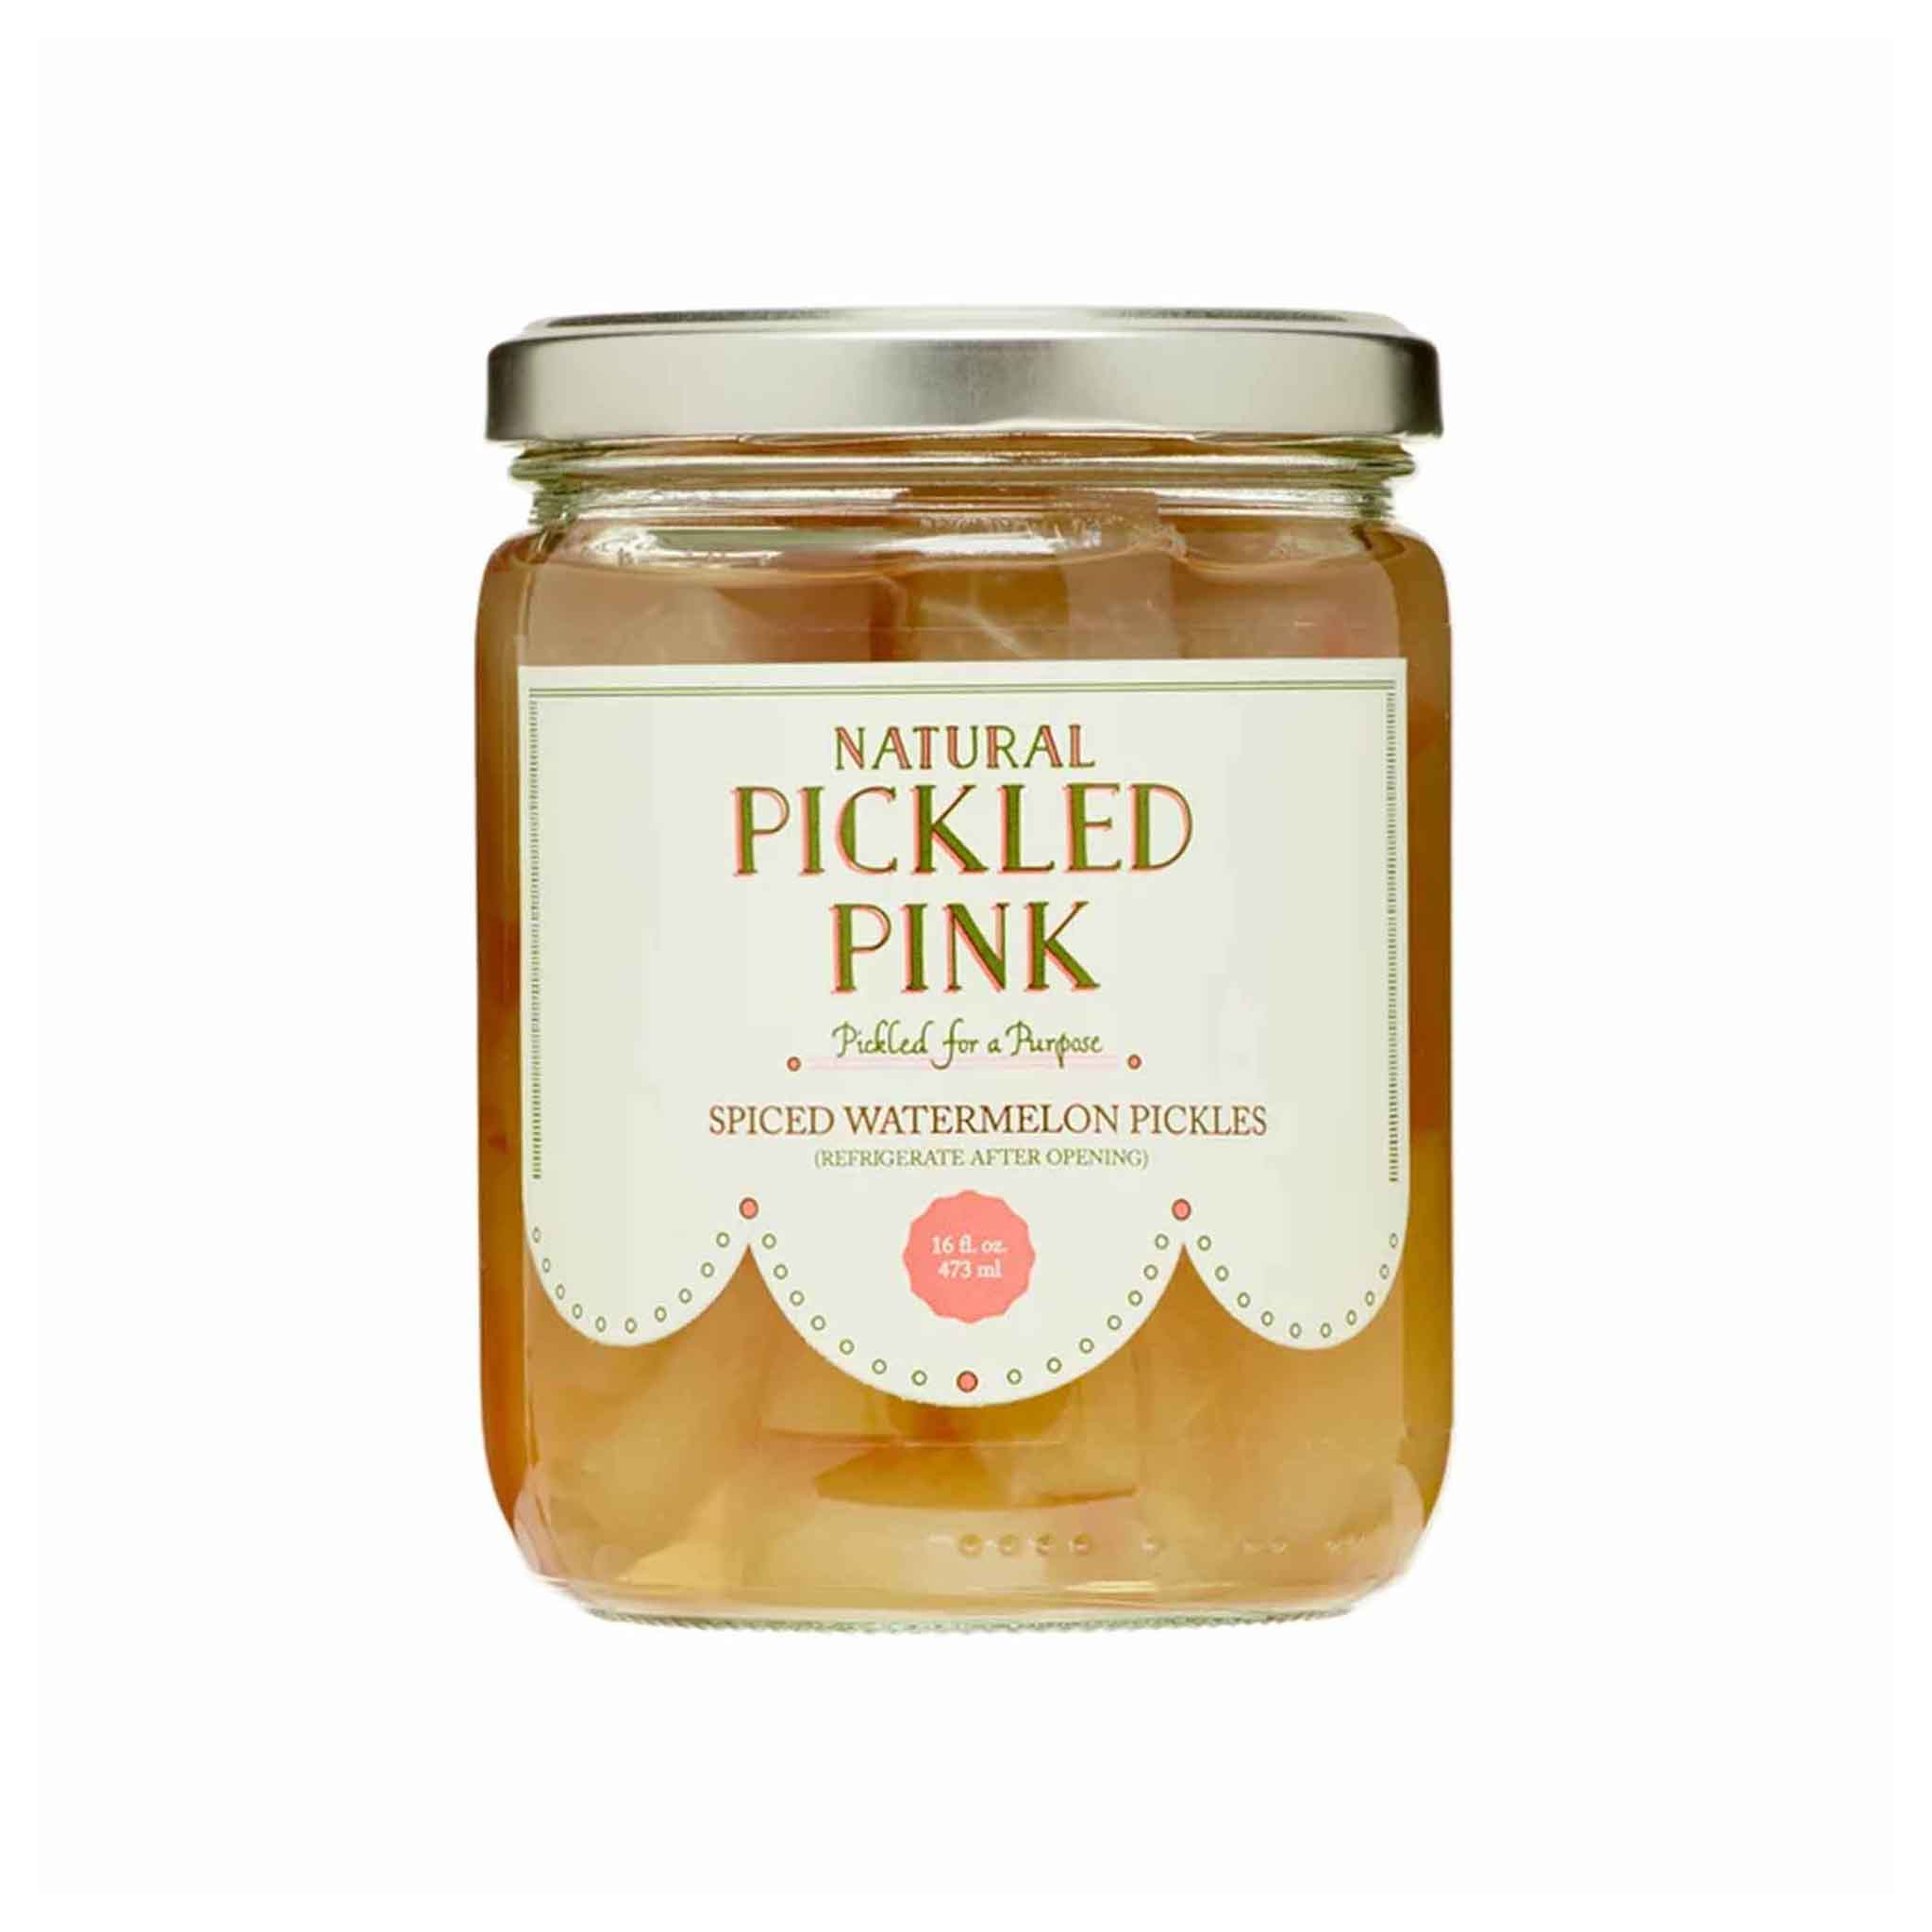 PICKLED PINK SPICED WATERMELON PICKLES 16oz